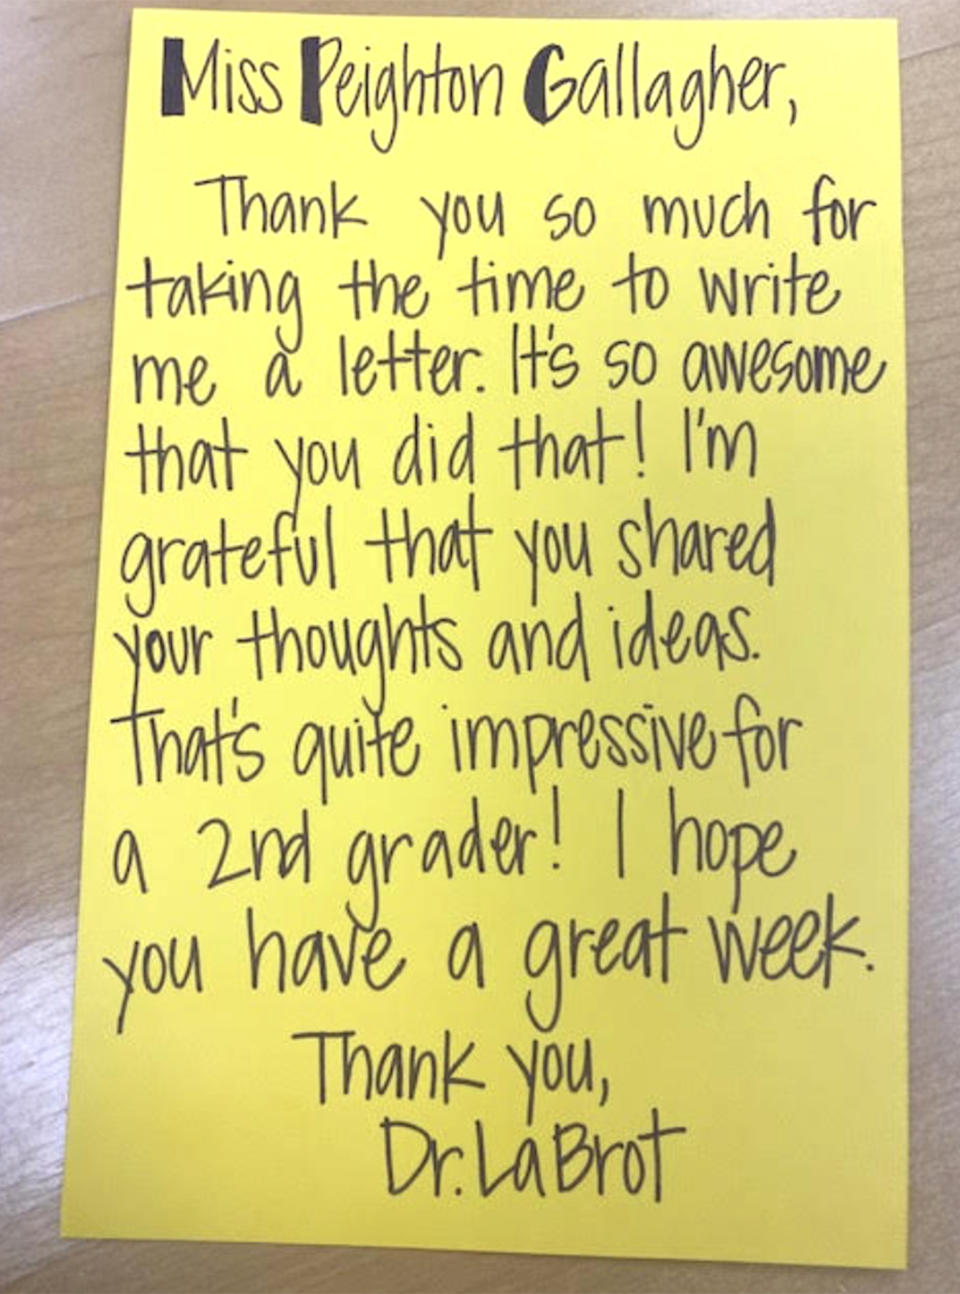 A note sent back to Peighton from a school administrator, thanking her for sharing her thoughts about school book bans. (Courtesy Rebecca Gallagher)